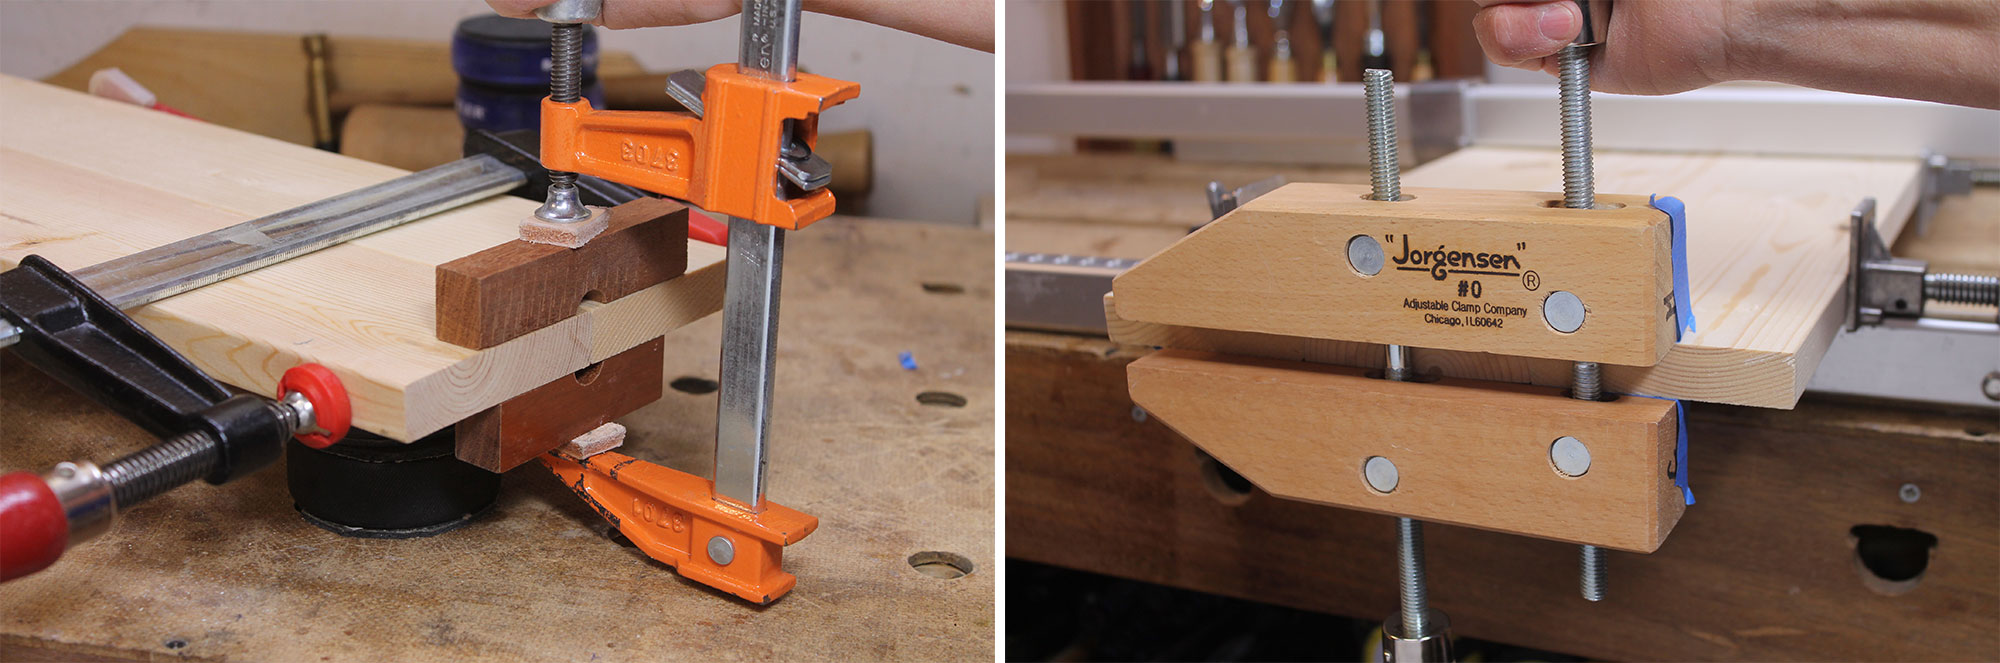 Image left: Using notched blocks to flush up the boards at the outer ends of each joint. Image right: Tape prevents glue from marring the handscrew.